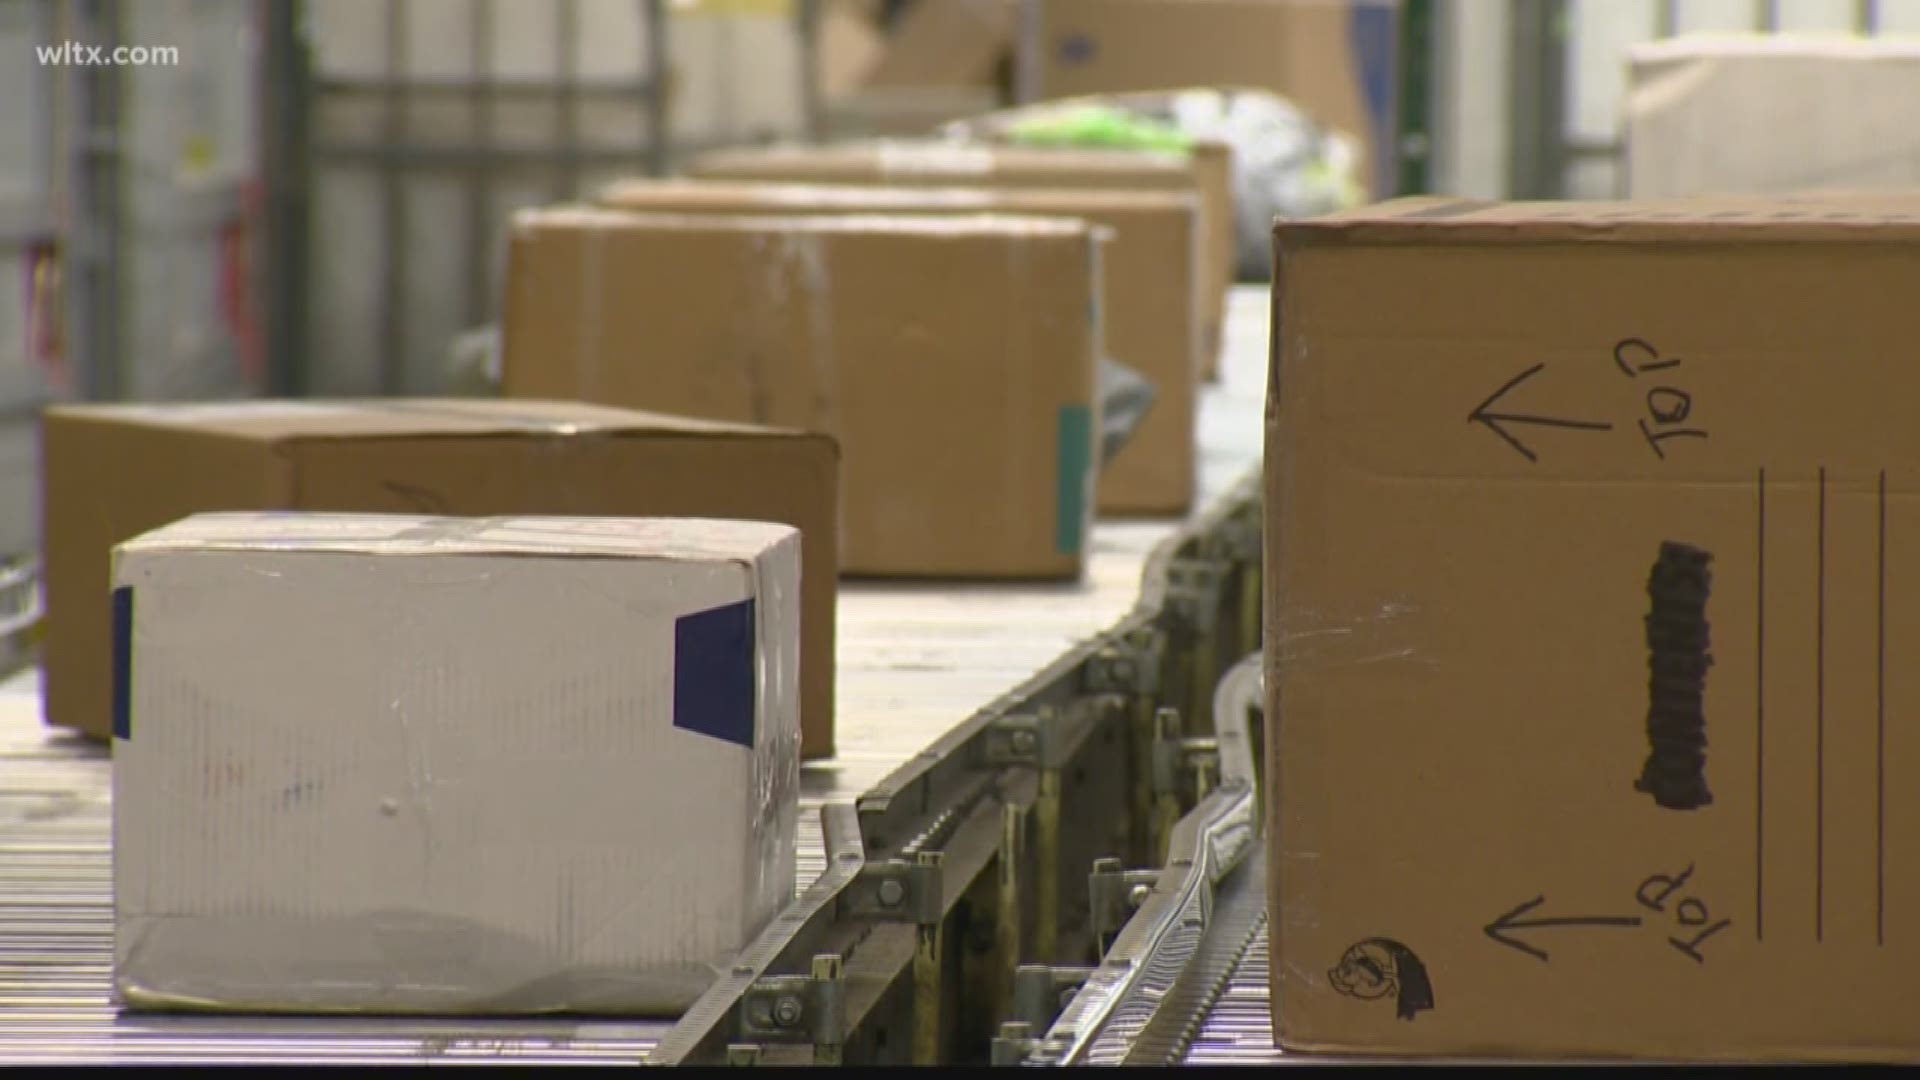 Friday is the shipping deadline for most providers to get your gifts in time for the holiday, but there may be some options if you need extra time.